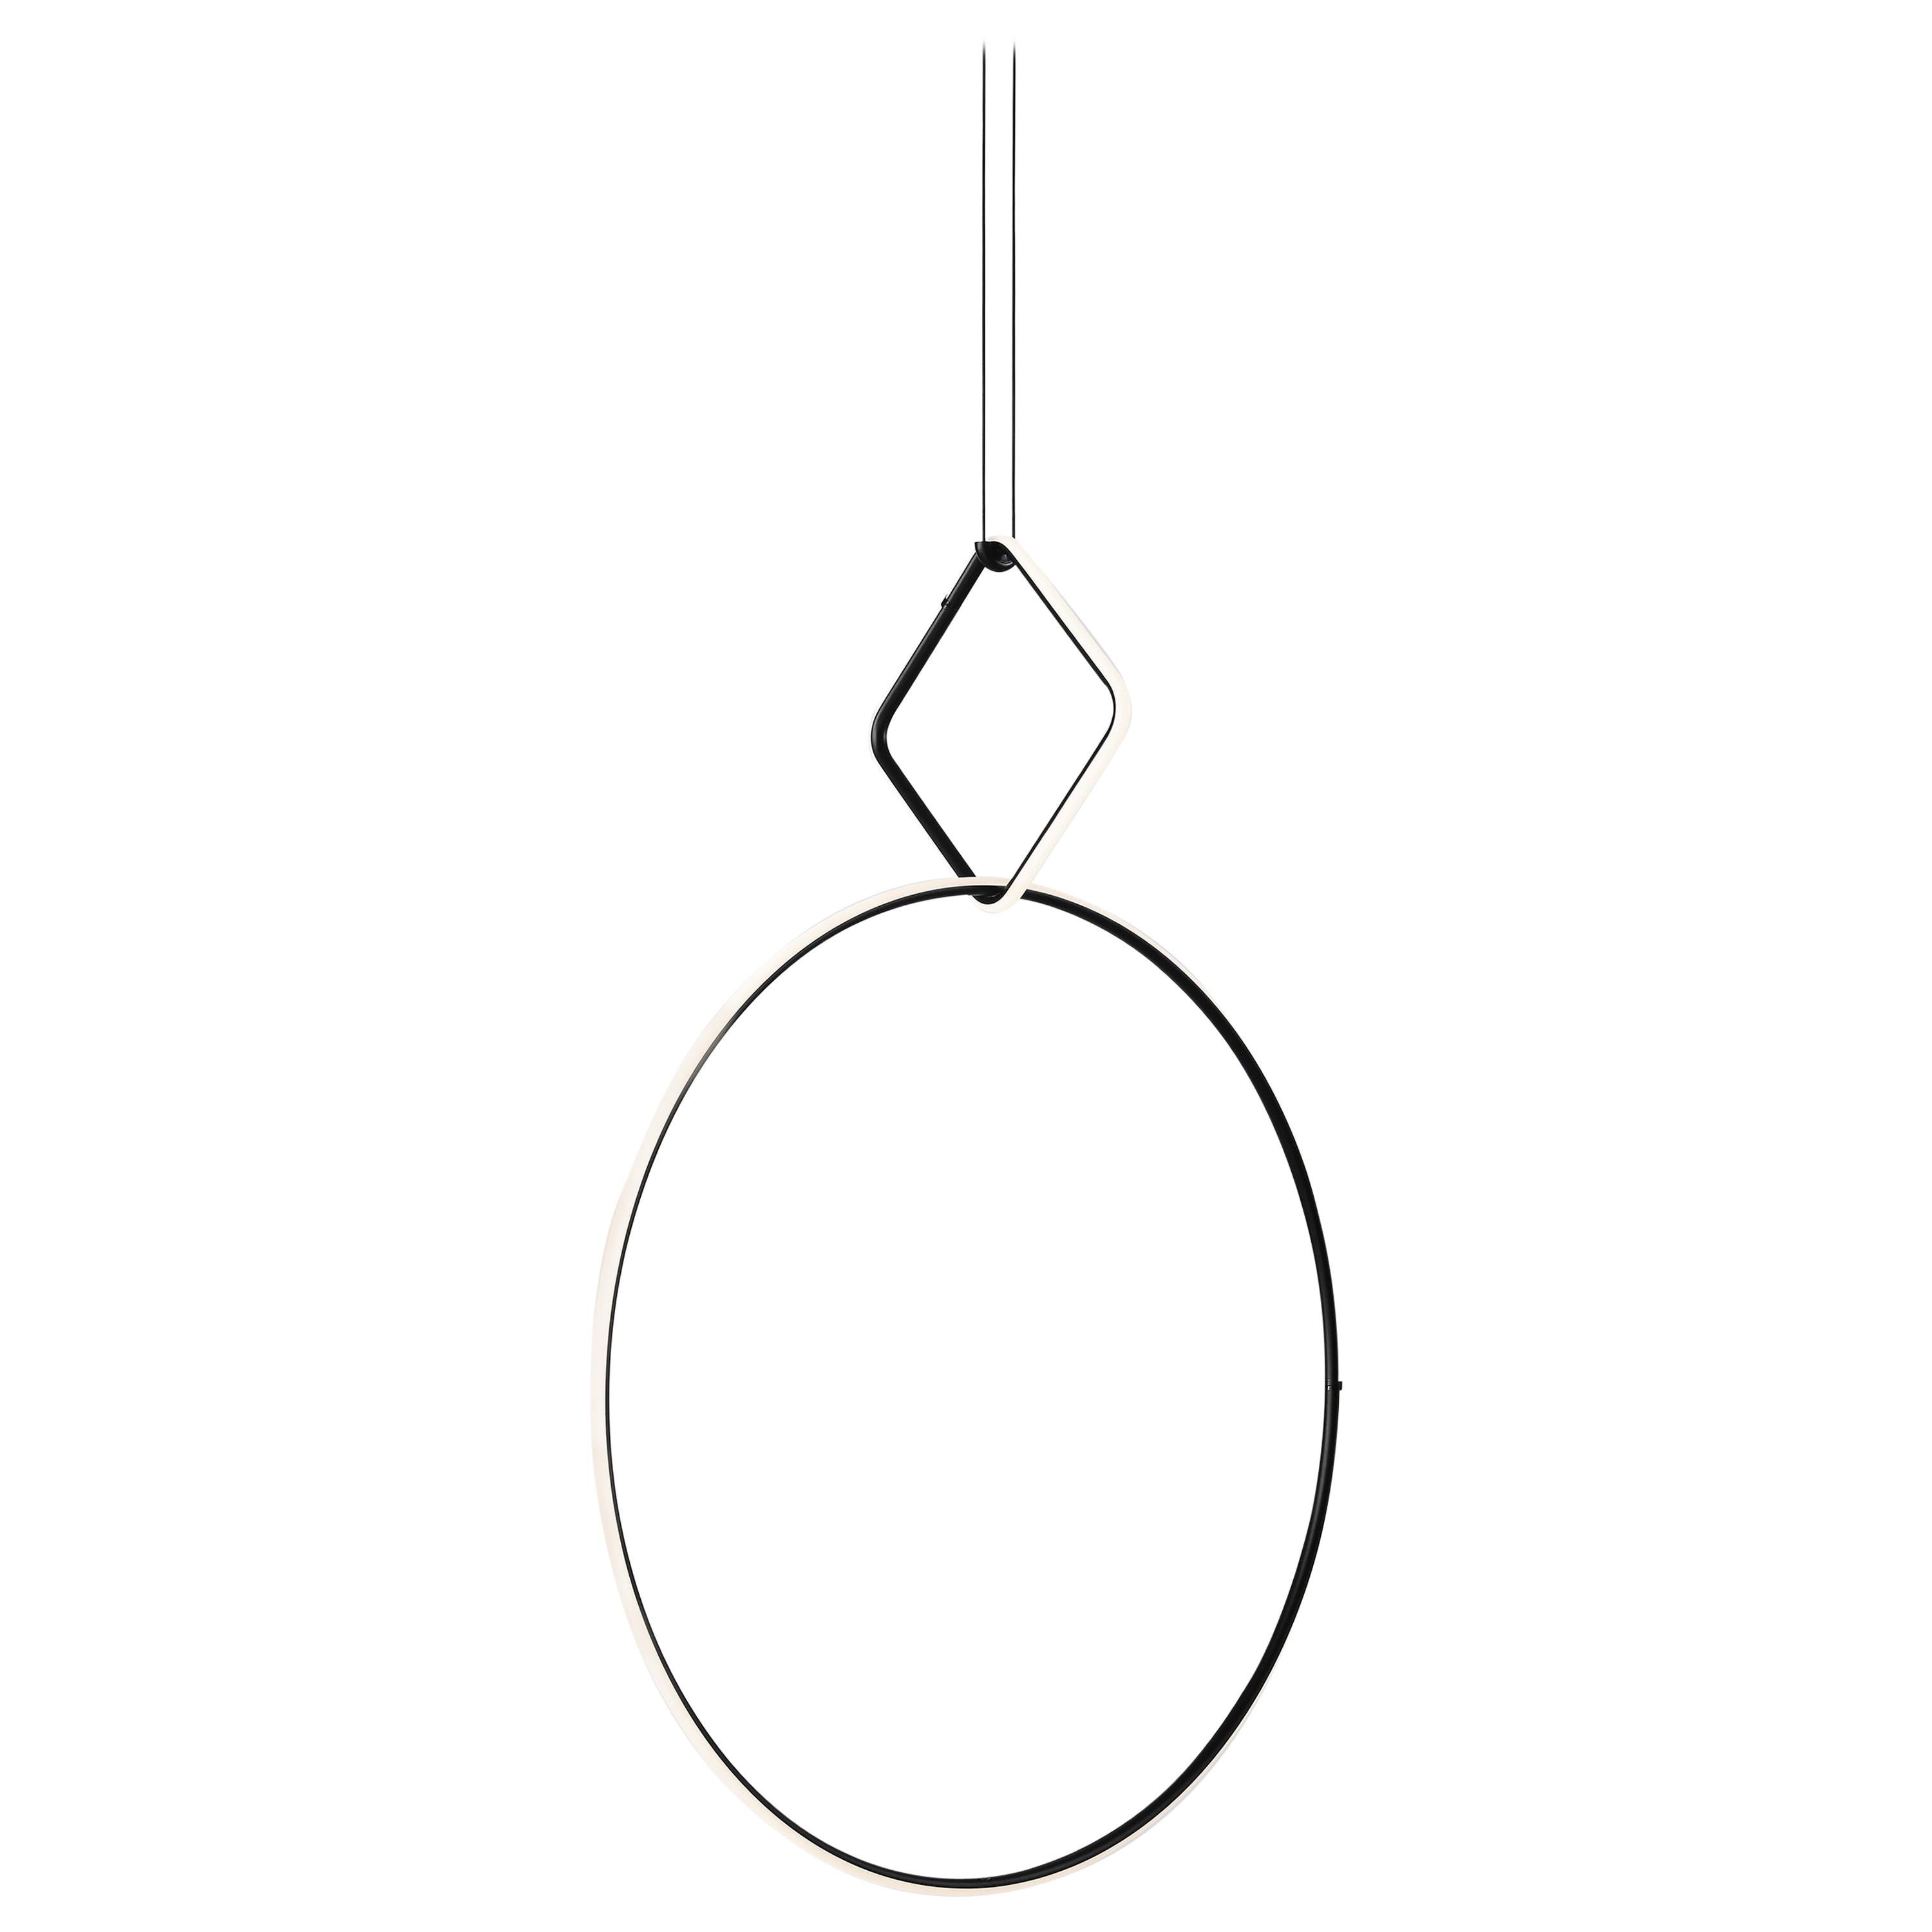 FLOS Small Square & Large Circle Arrangements Light by Michael Anastassiades